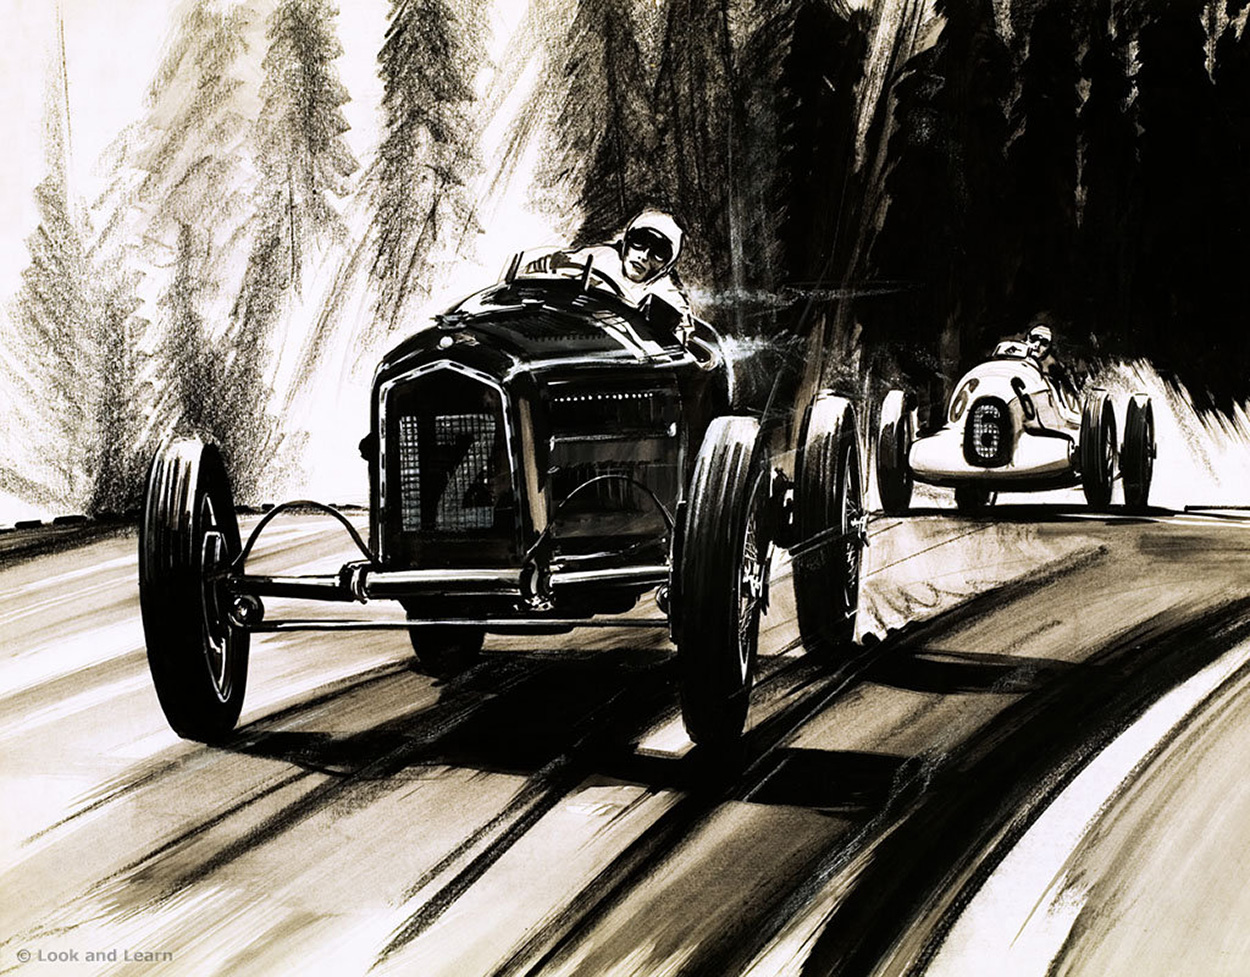 Motor Racing at the Nurburgring in the 1930s (Original) art by Gerry Wood Art at The Illustration Art Gallery